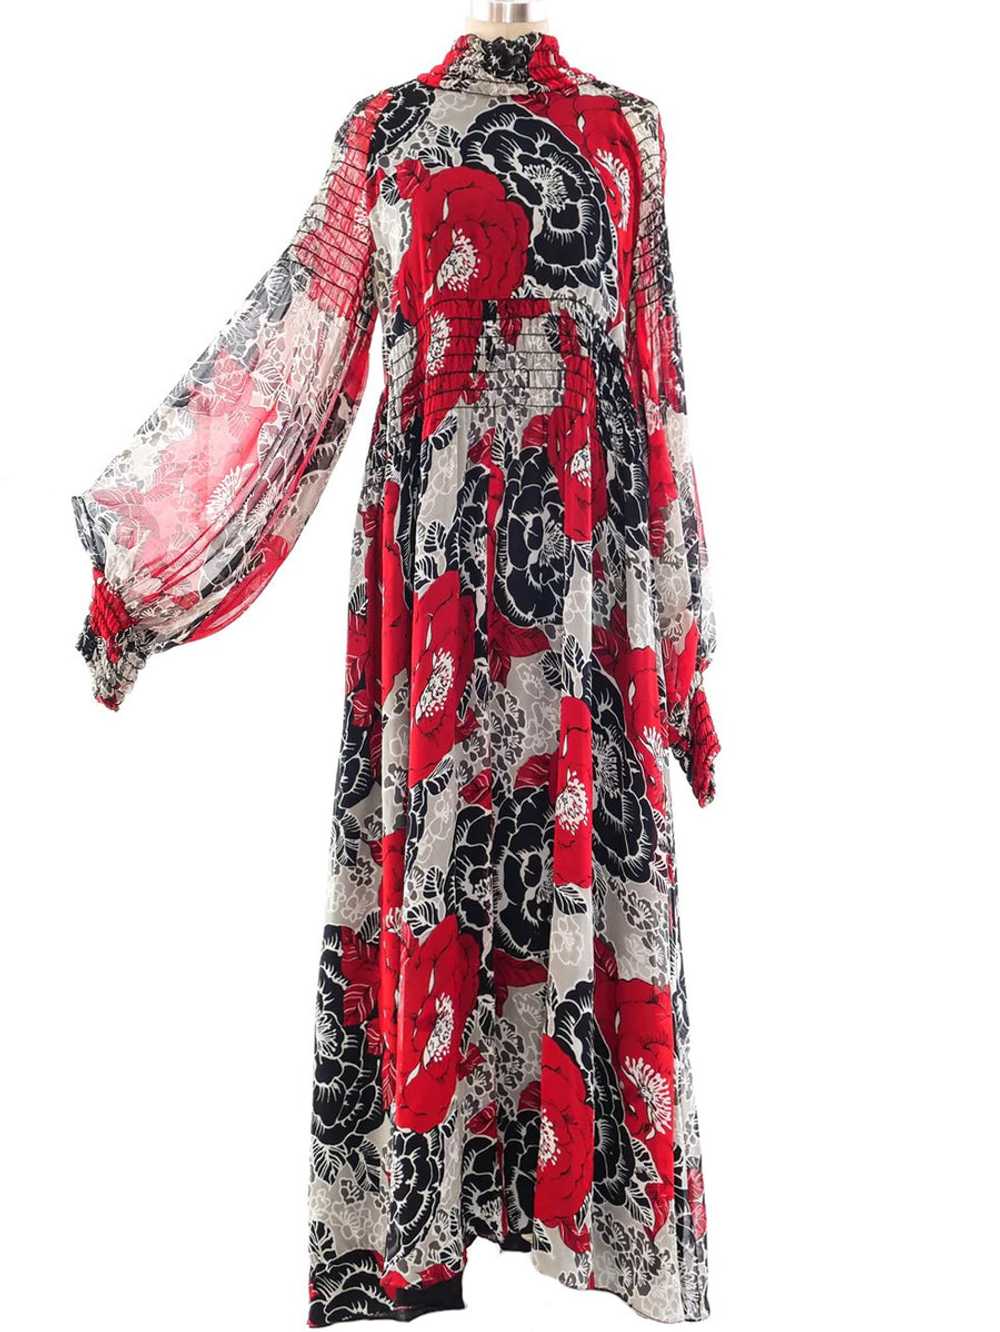 Scott Barrie Floral Printed Gown - image 4